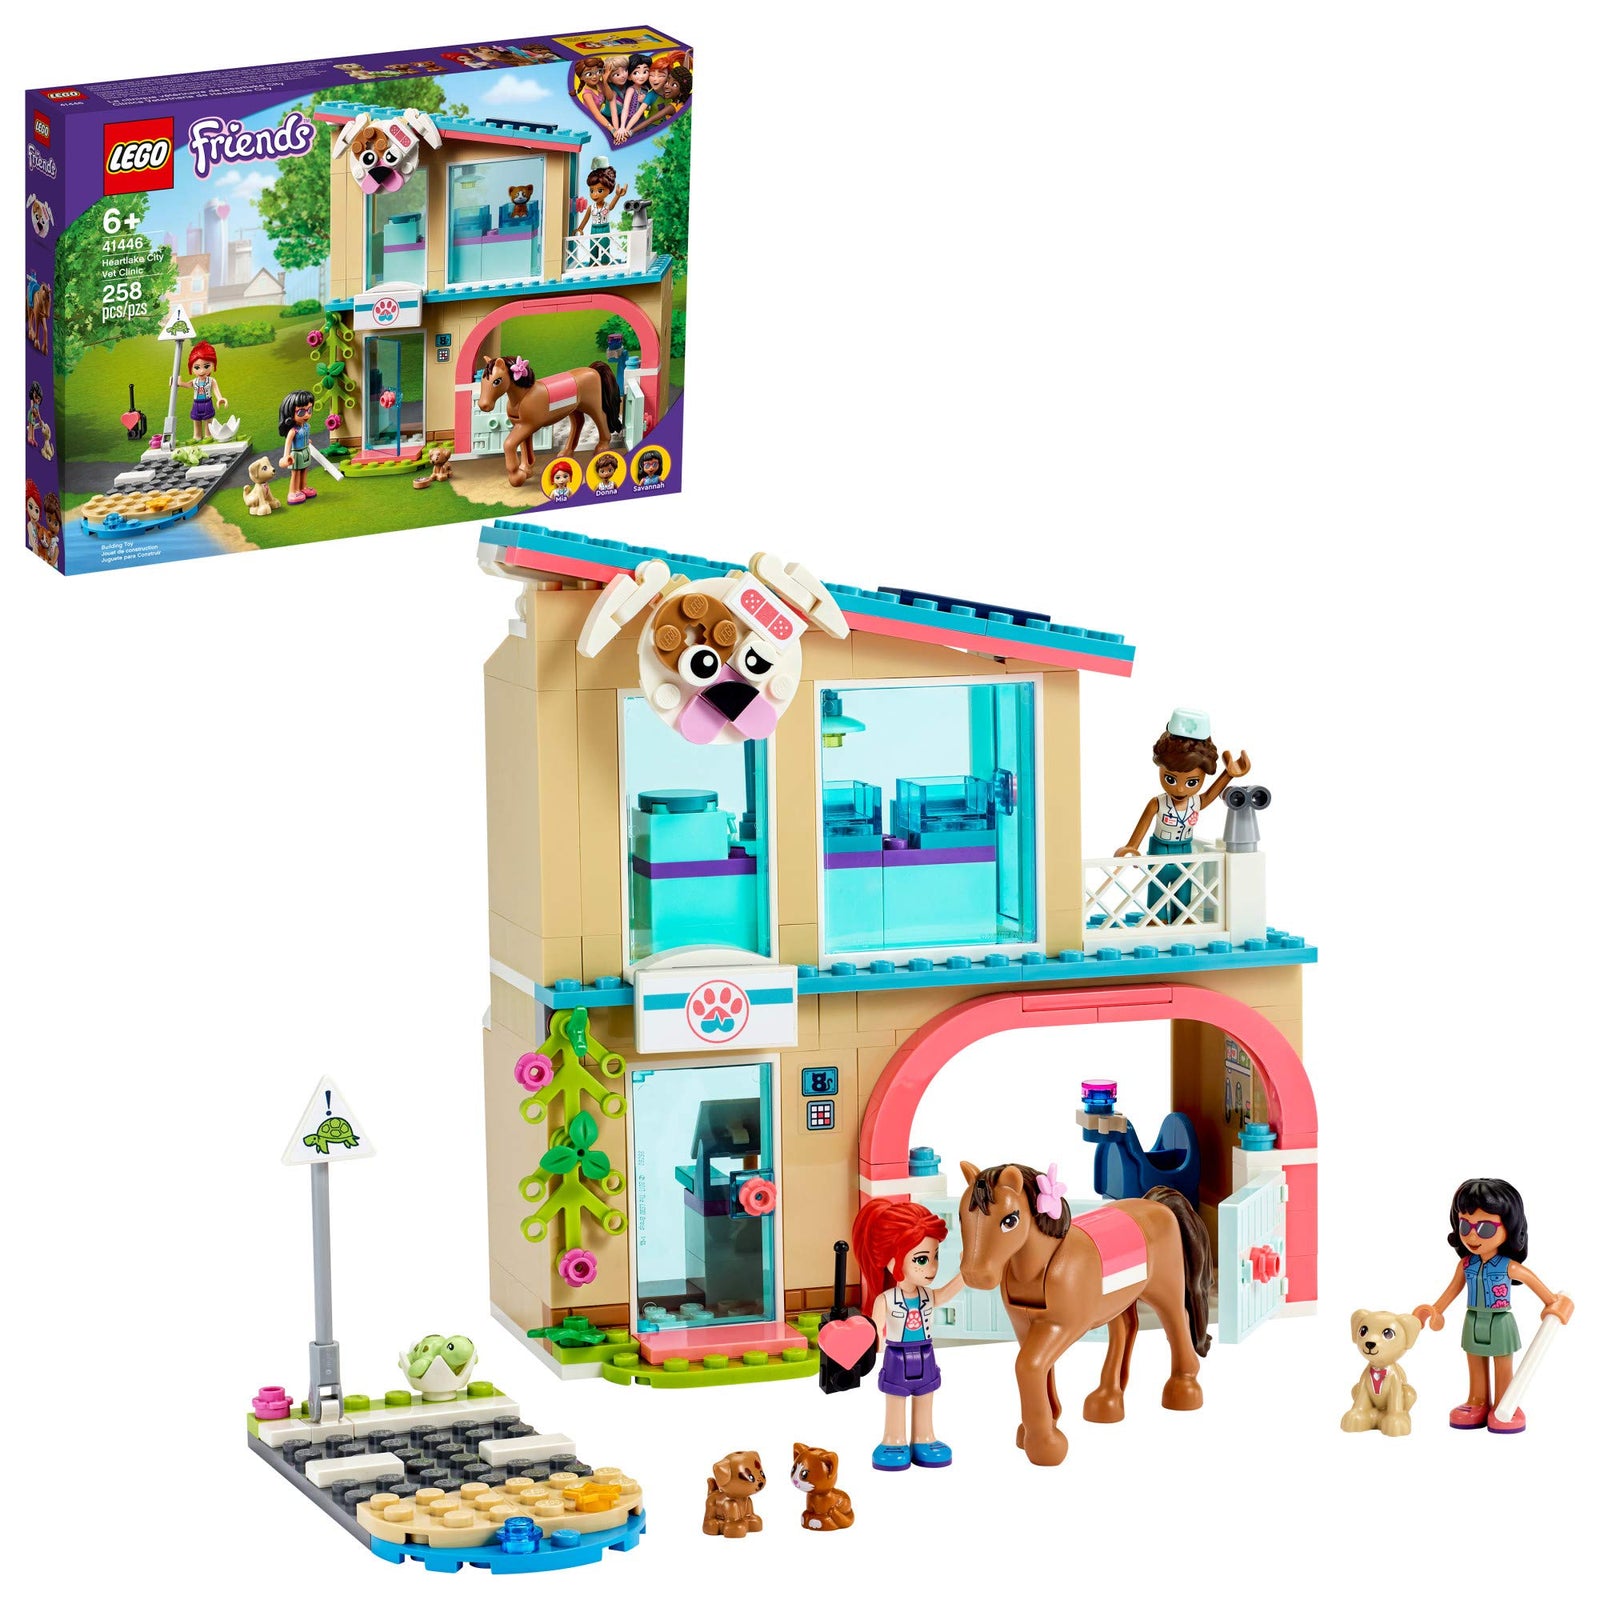 LEGO Friends Heartlake City Vet Clinic 41446 Building Kit; Animal Rescue Toy Makes a Great-Value Christmas, Holiday or Birthday Gift for Kids Who Love Vet Clinic Pretend Play, New 2021 (258 Pieces)